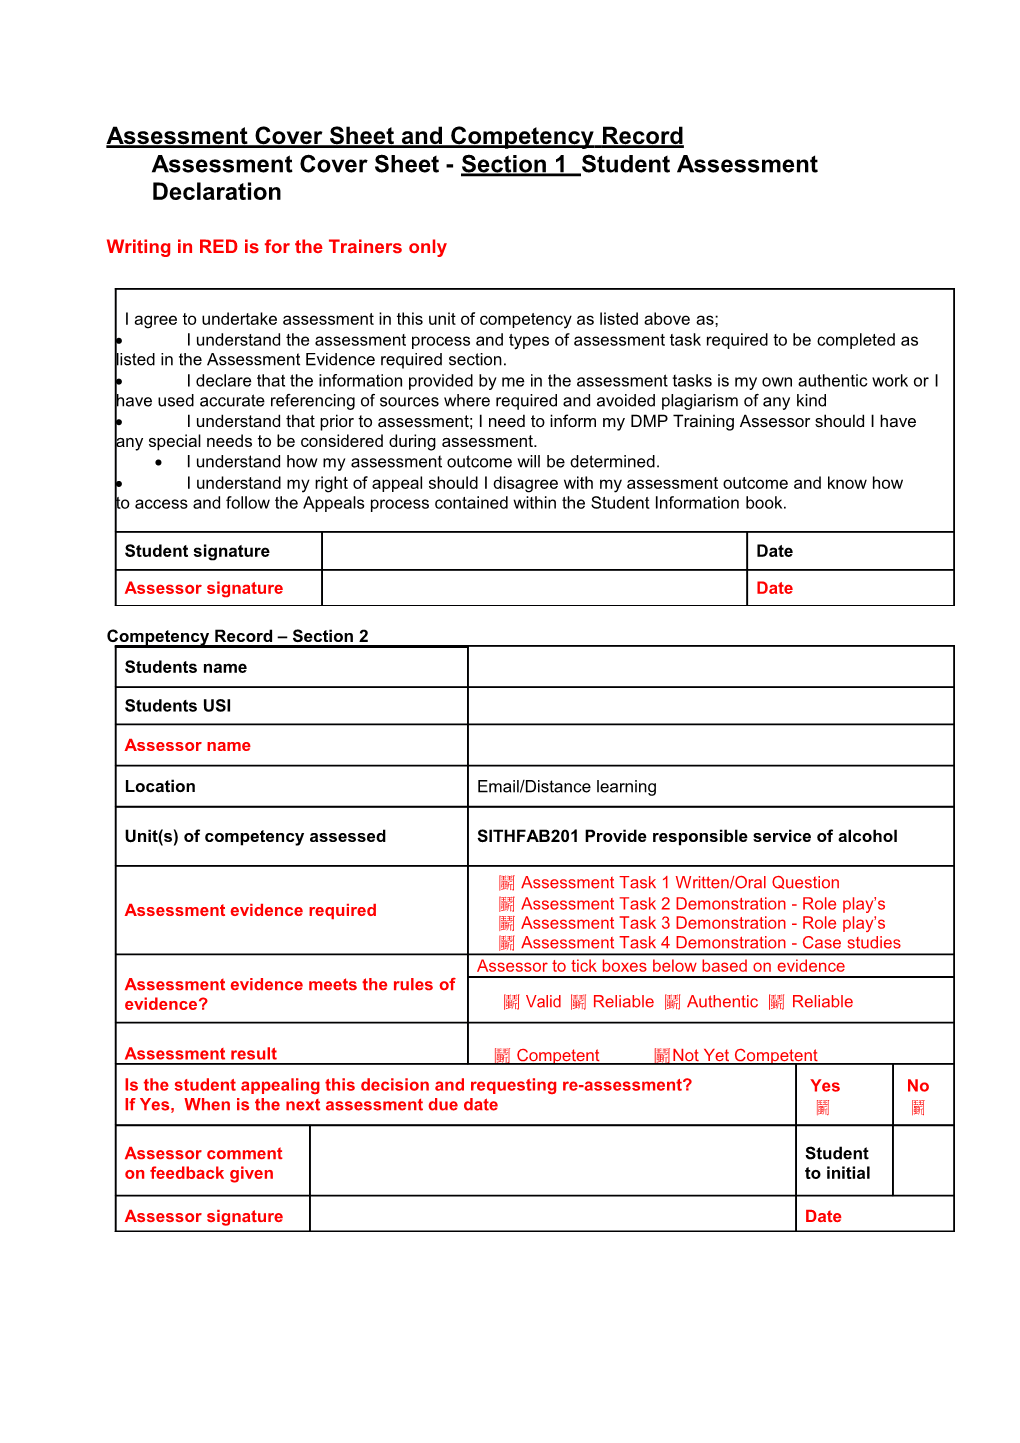 Assessment Cover Sheet and Competency Record